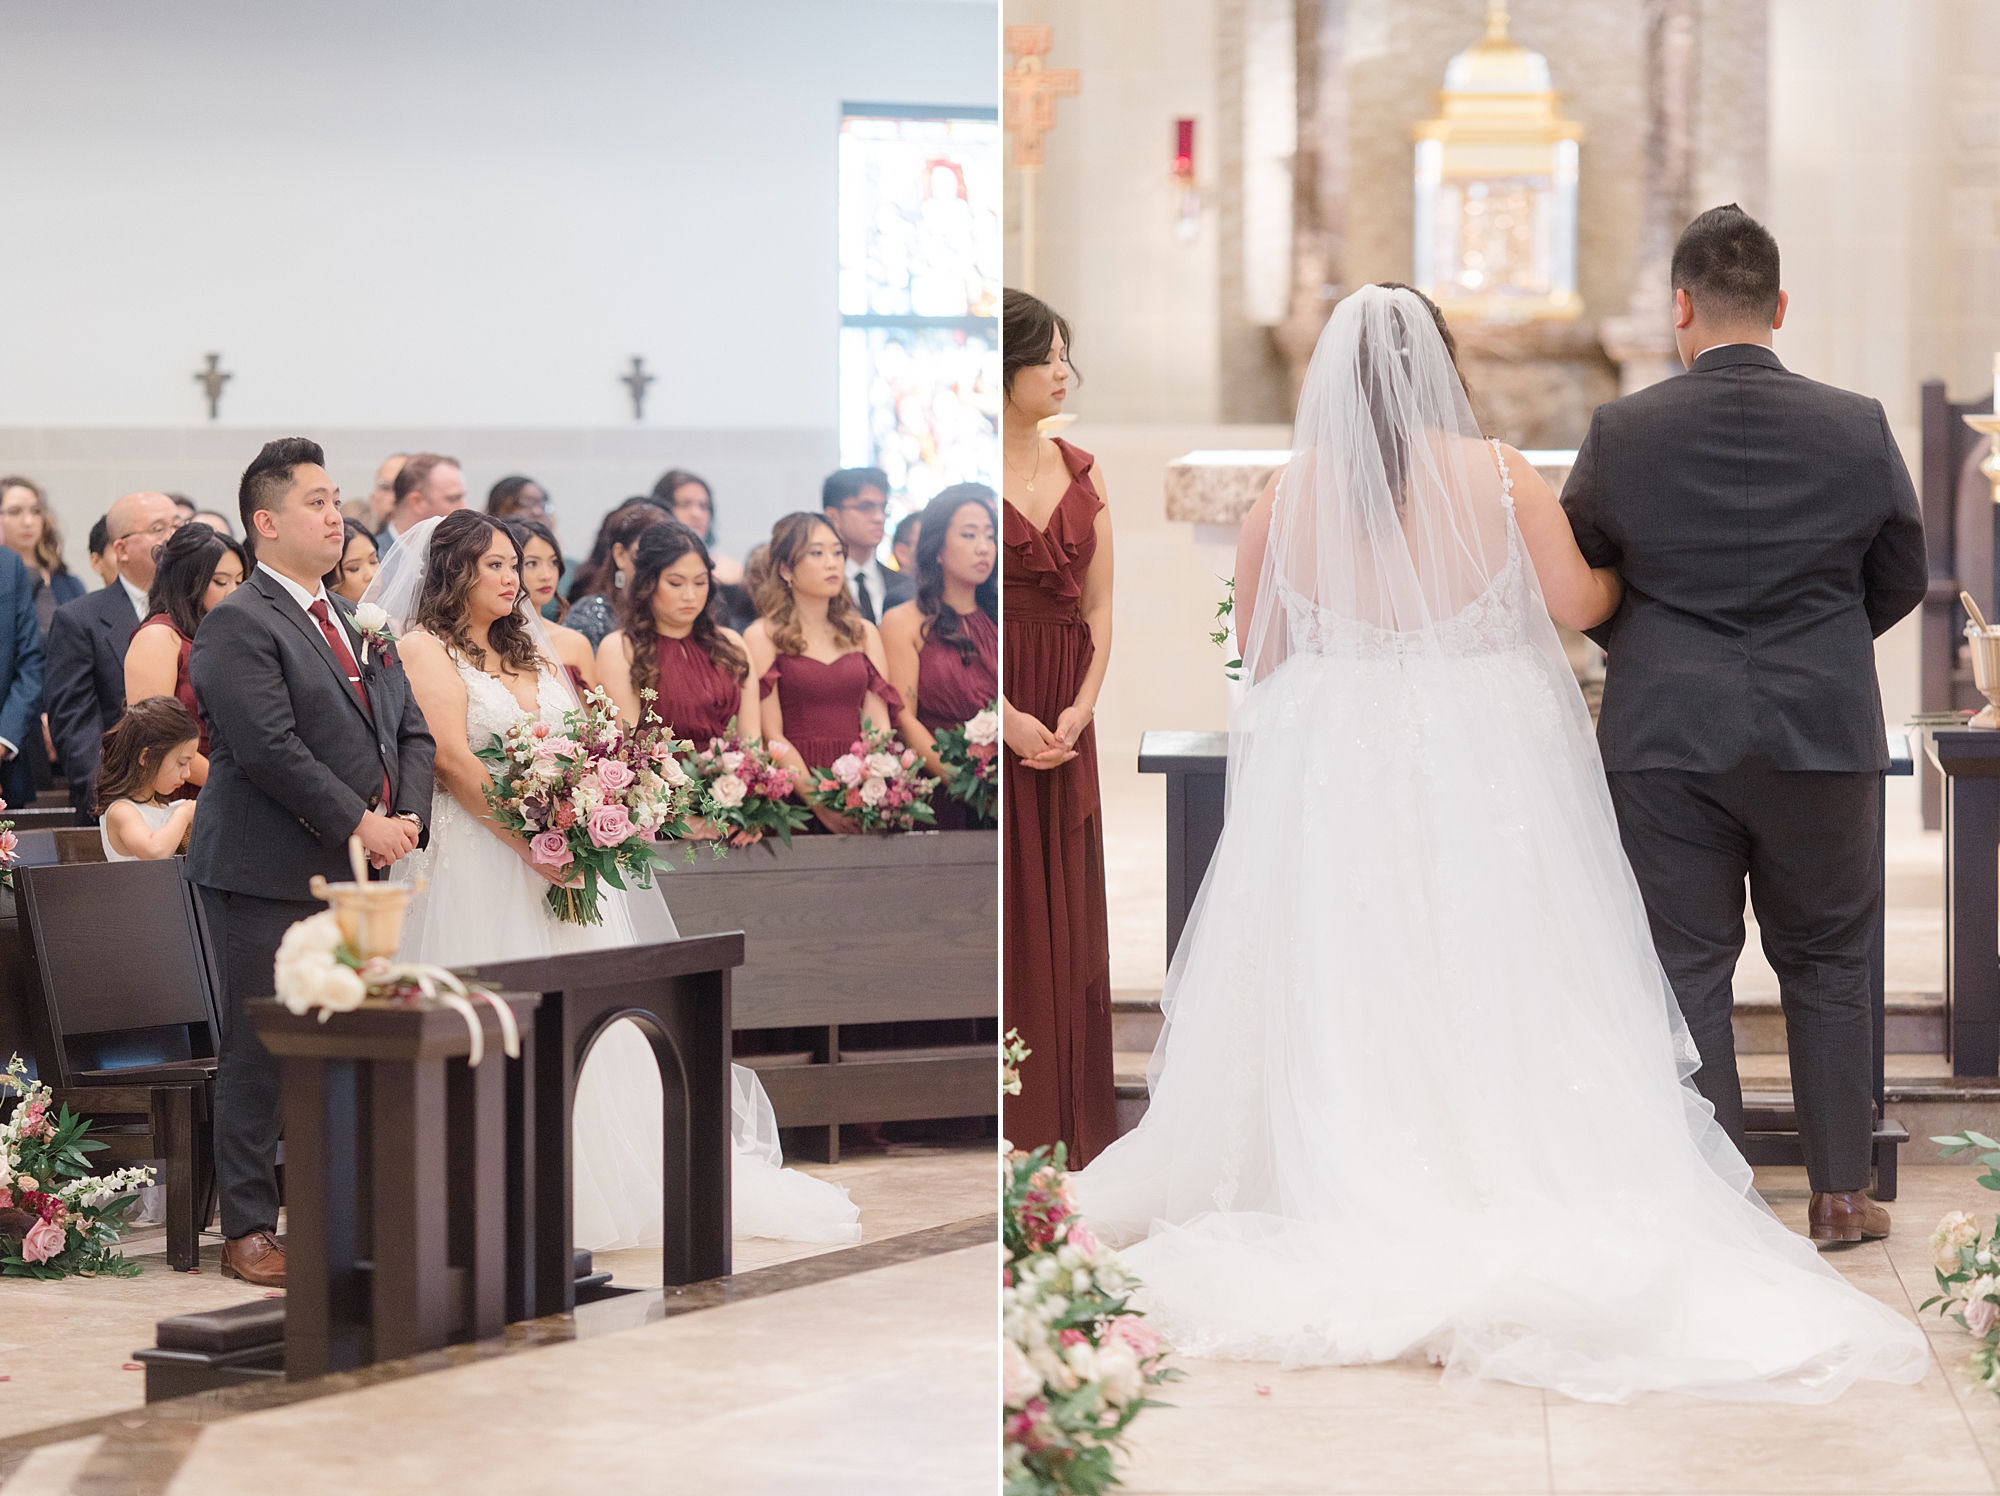 newlyweds kneel together at alter in St. Francis of Assisi Catholic Church Frisco